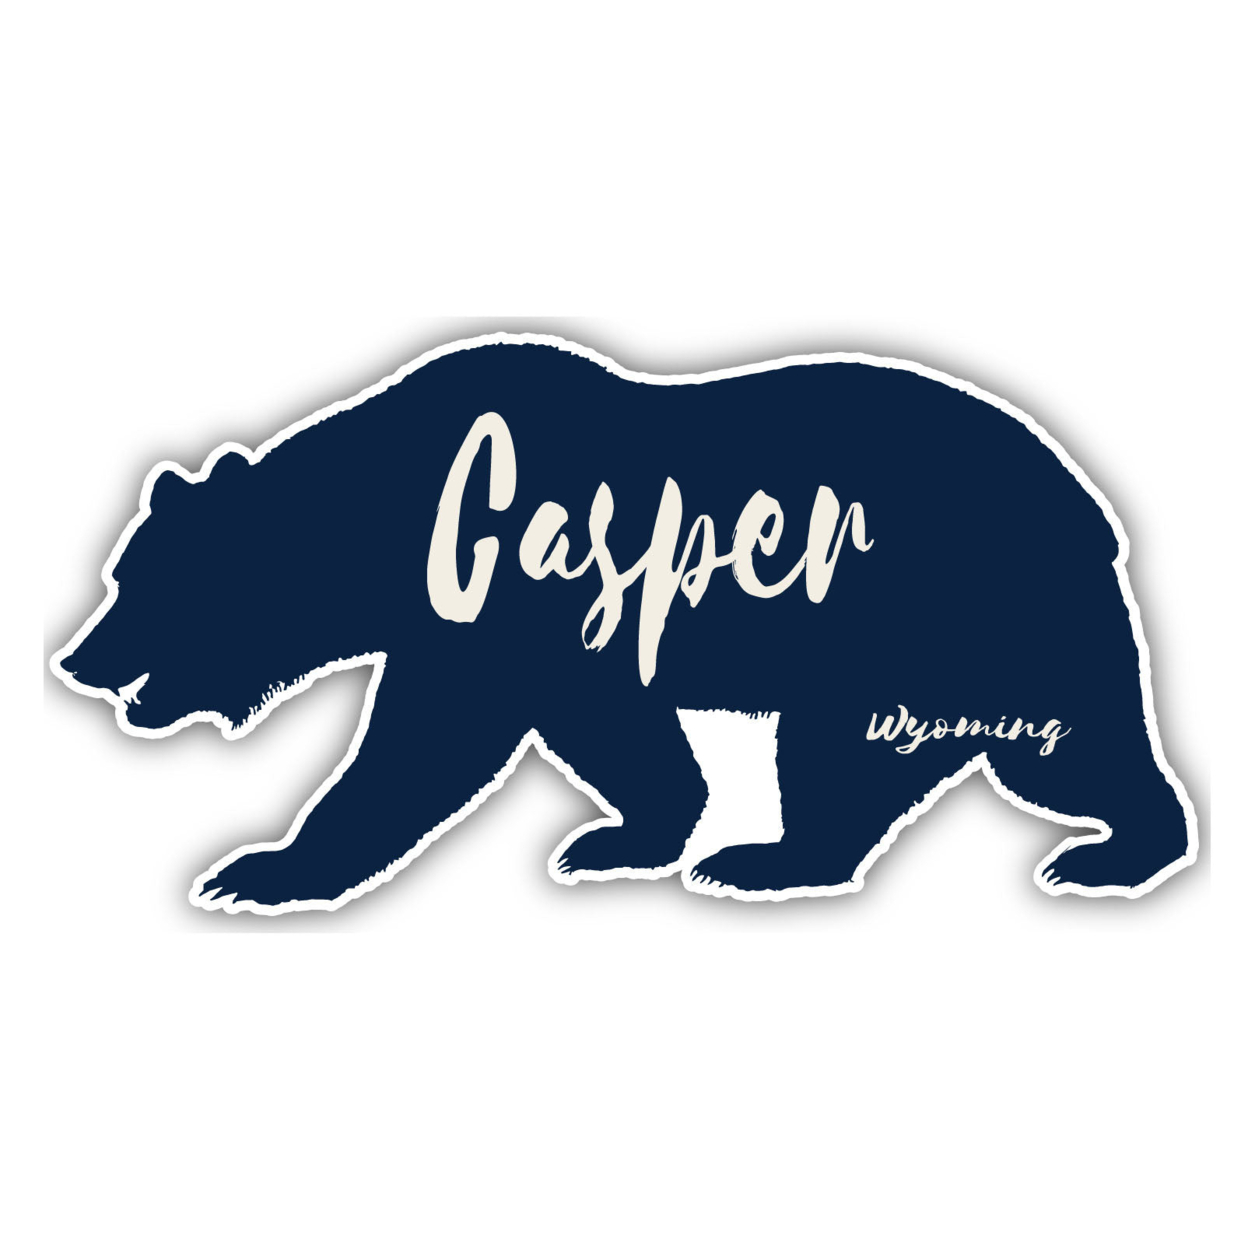 Casper Wyoming Souvenir Decorative Stickers (Choose Theme And Size) - 4-Pack, 6-Inch, Bear